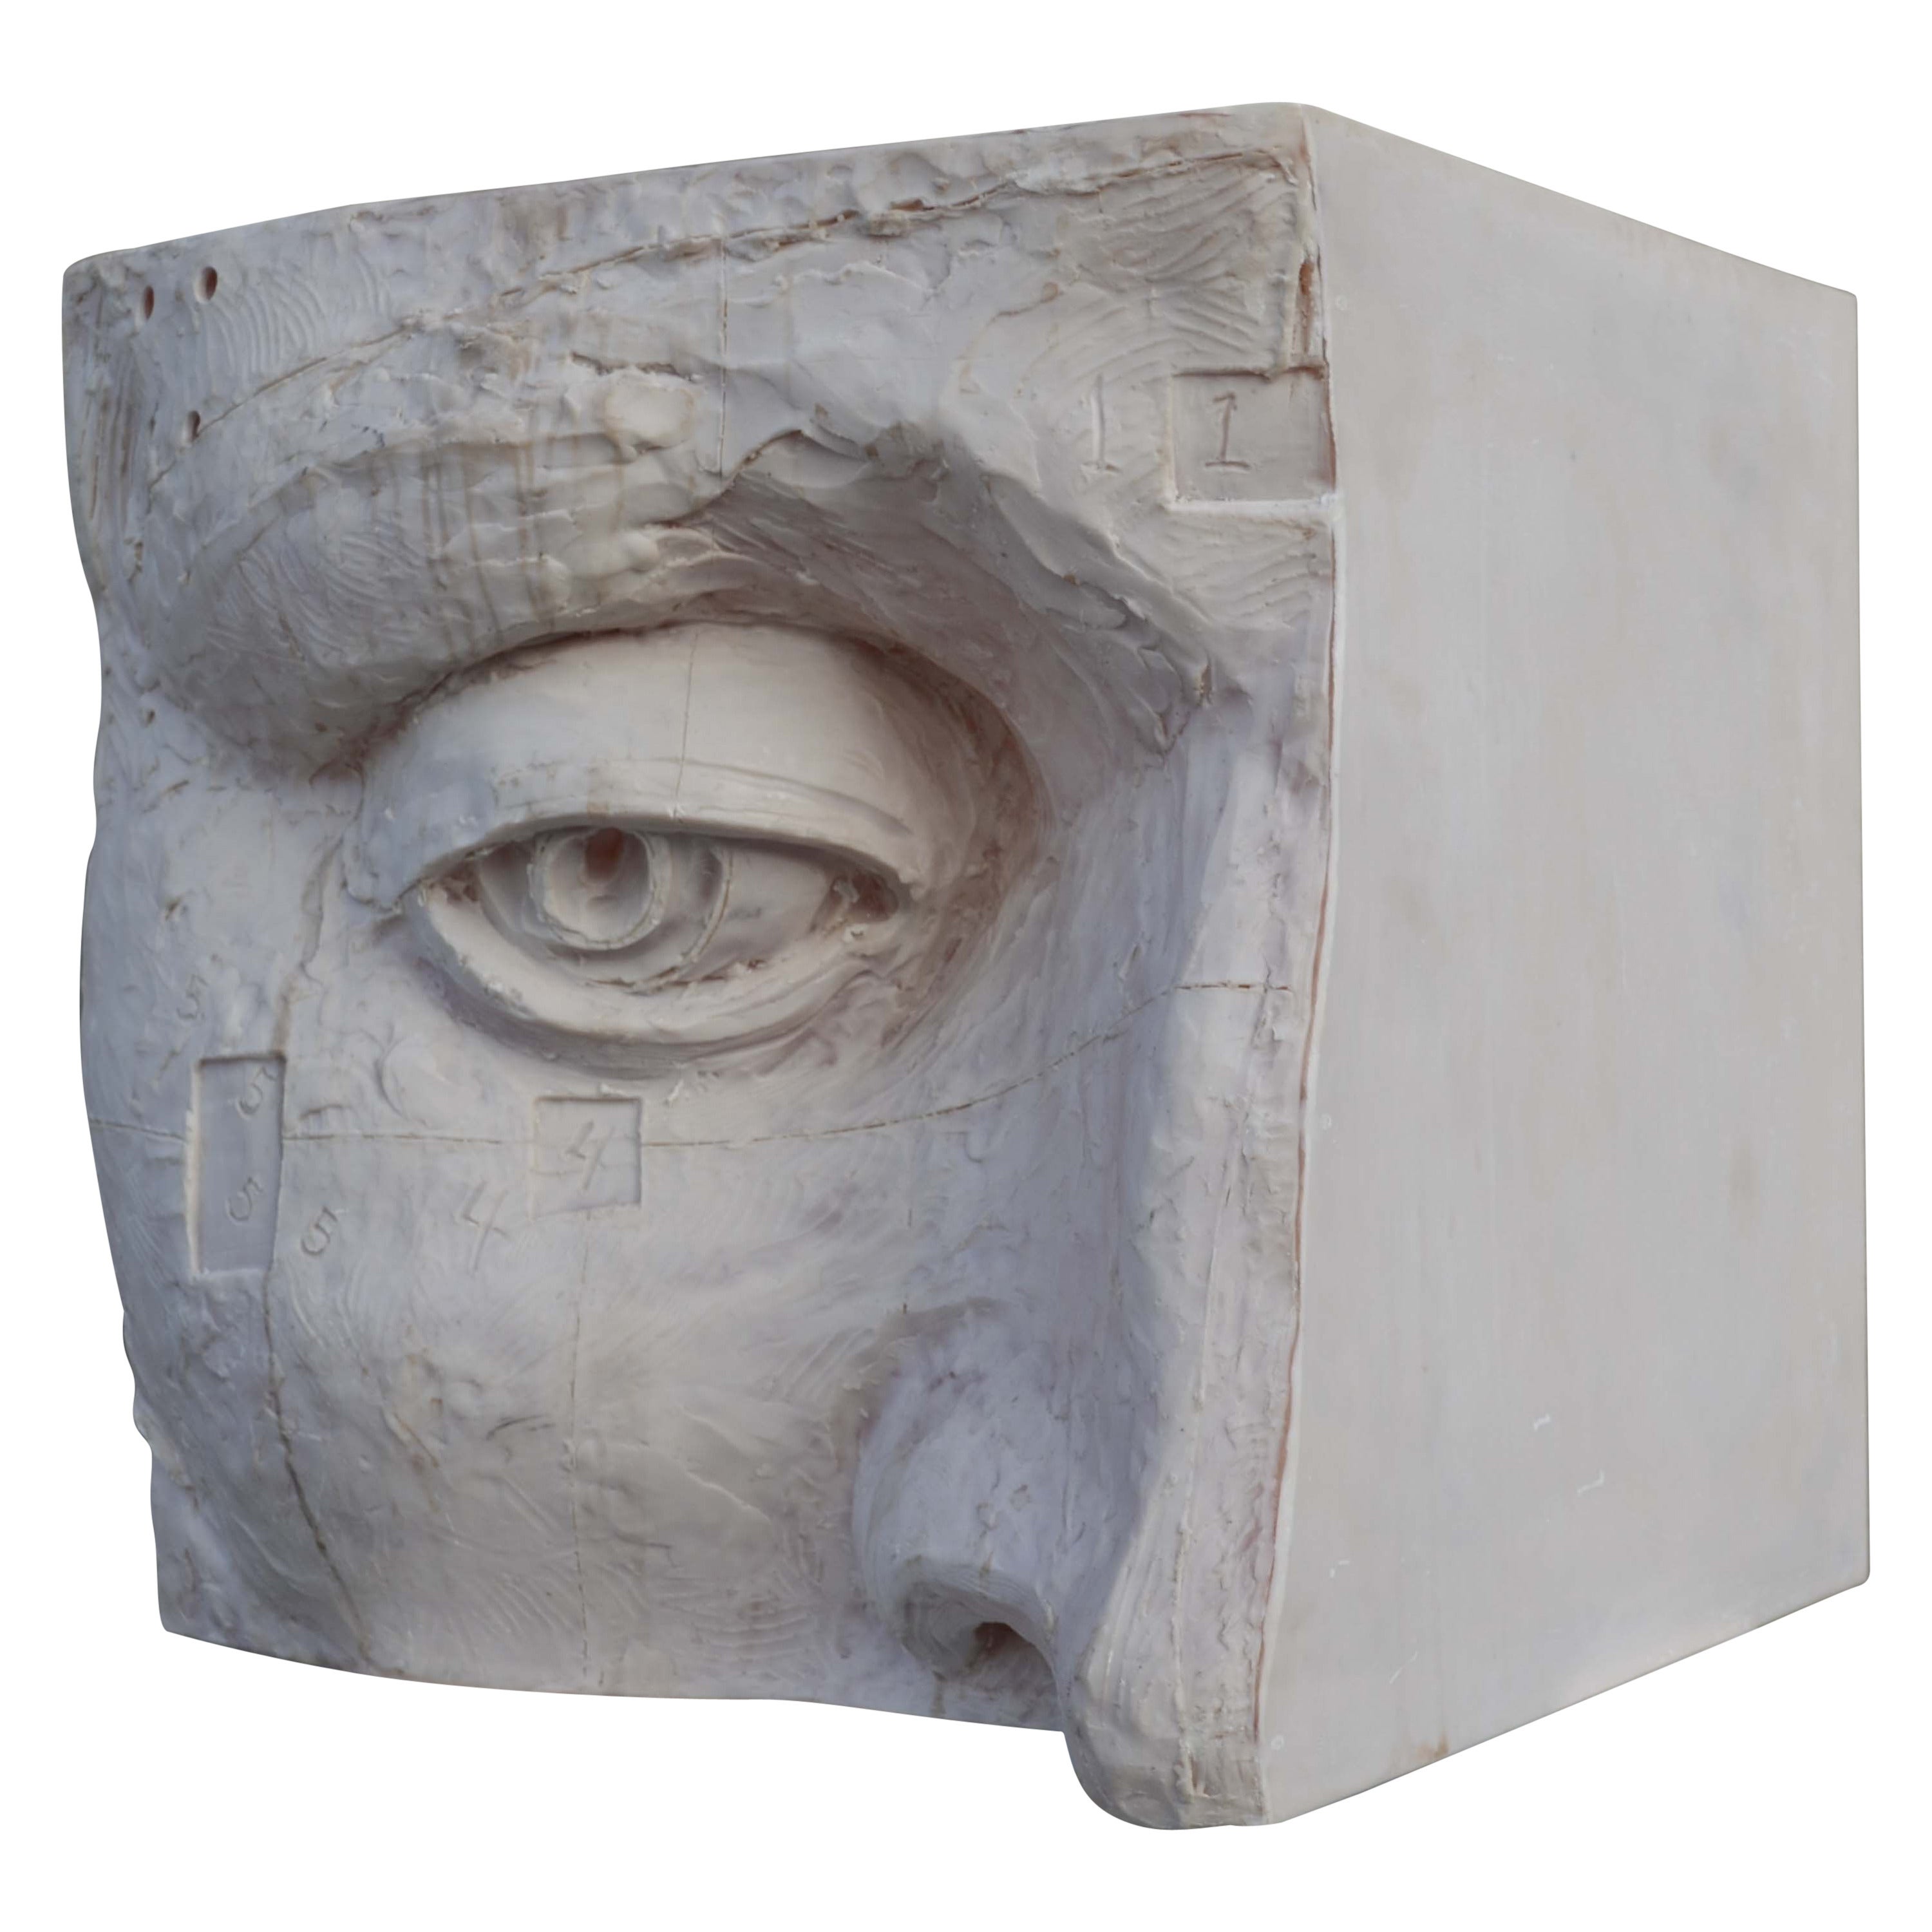 Cubo G Sculpture by Javier Marin